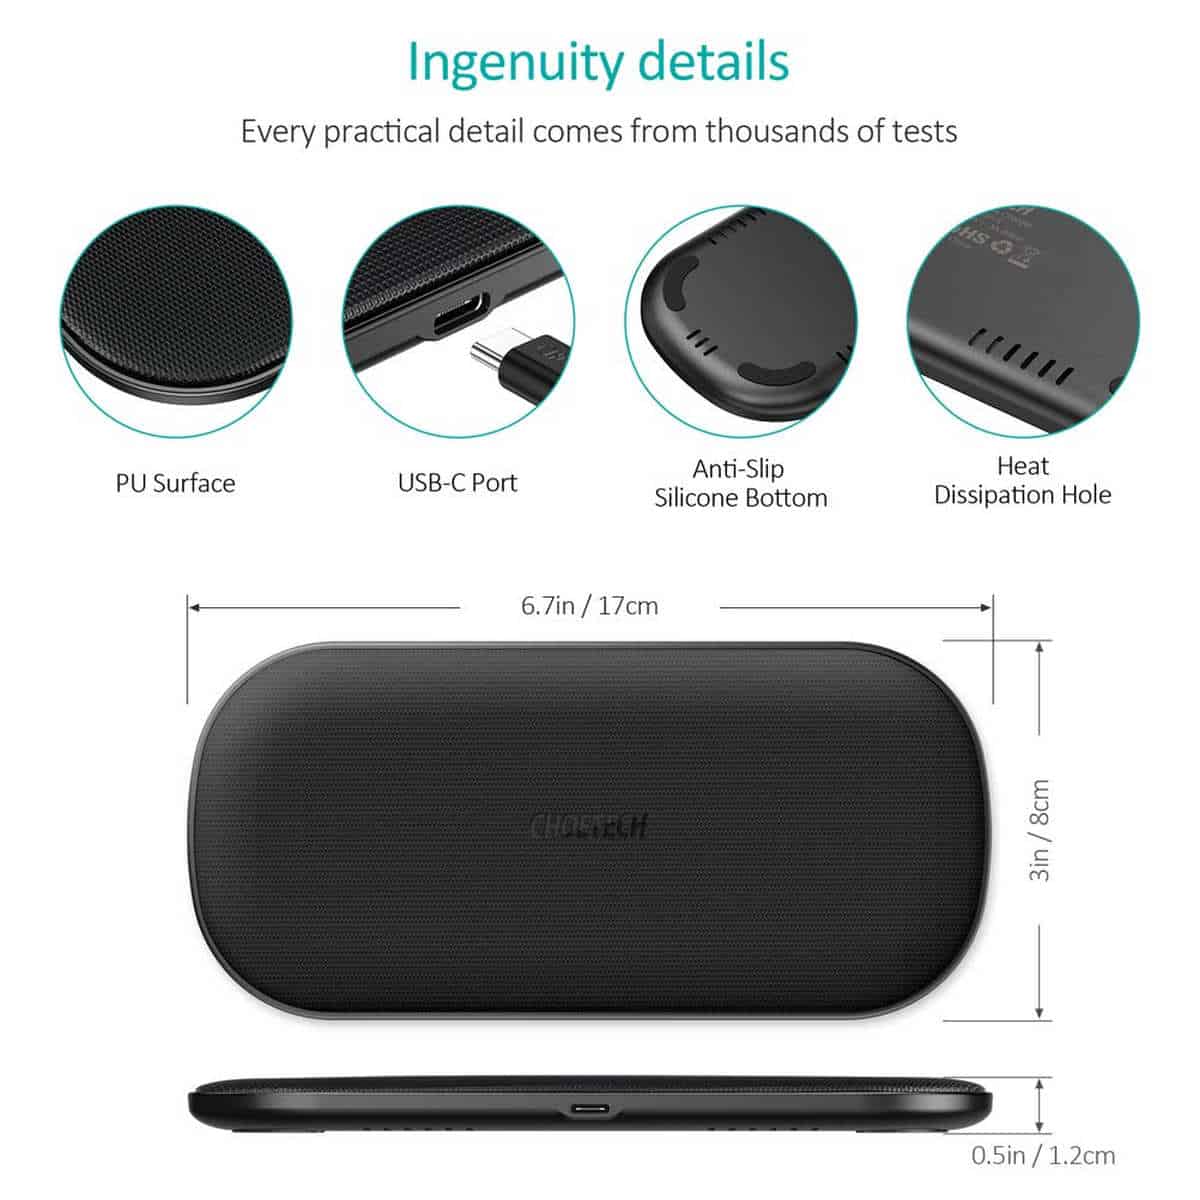 CHOETECH-Wireless-Charger Ingenuity details | CHOETECH Qi Fast Dual Wireless Charging Pad | Product Review